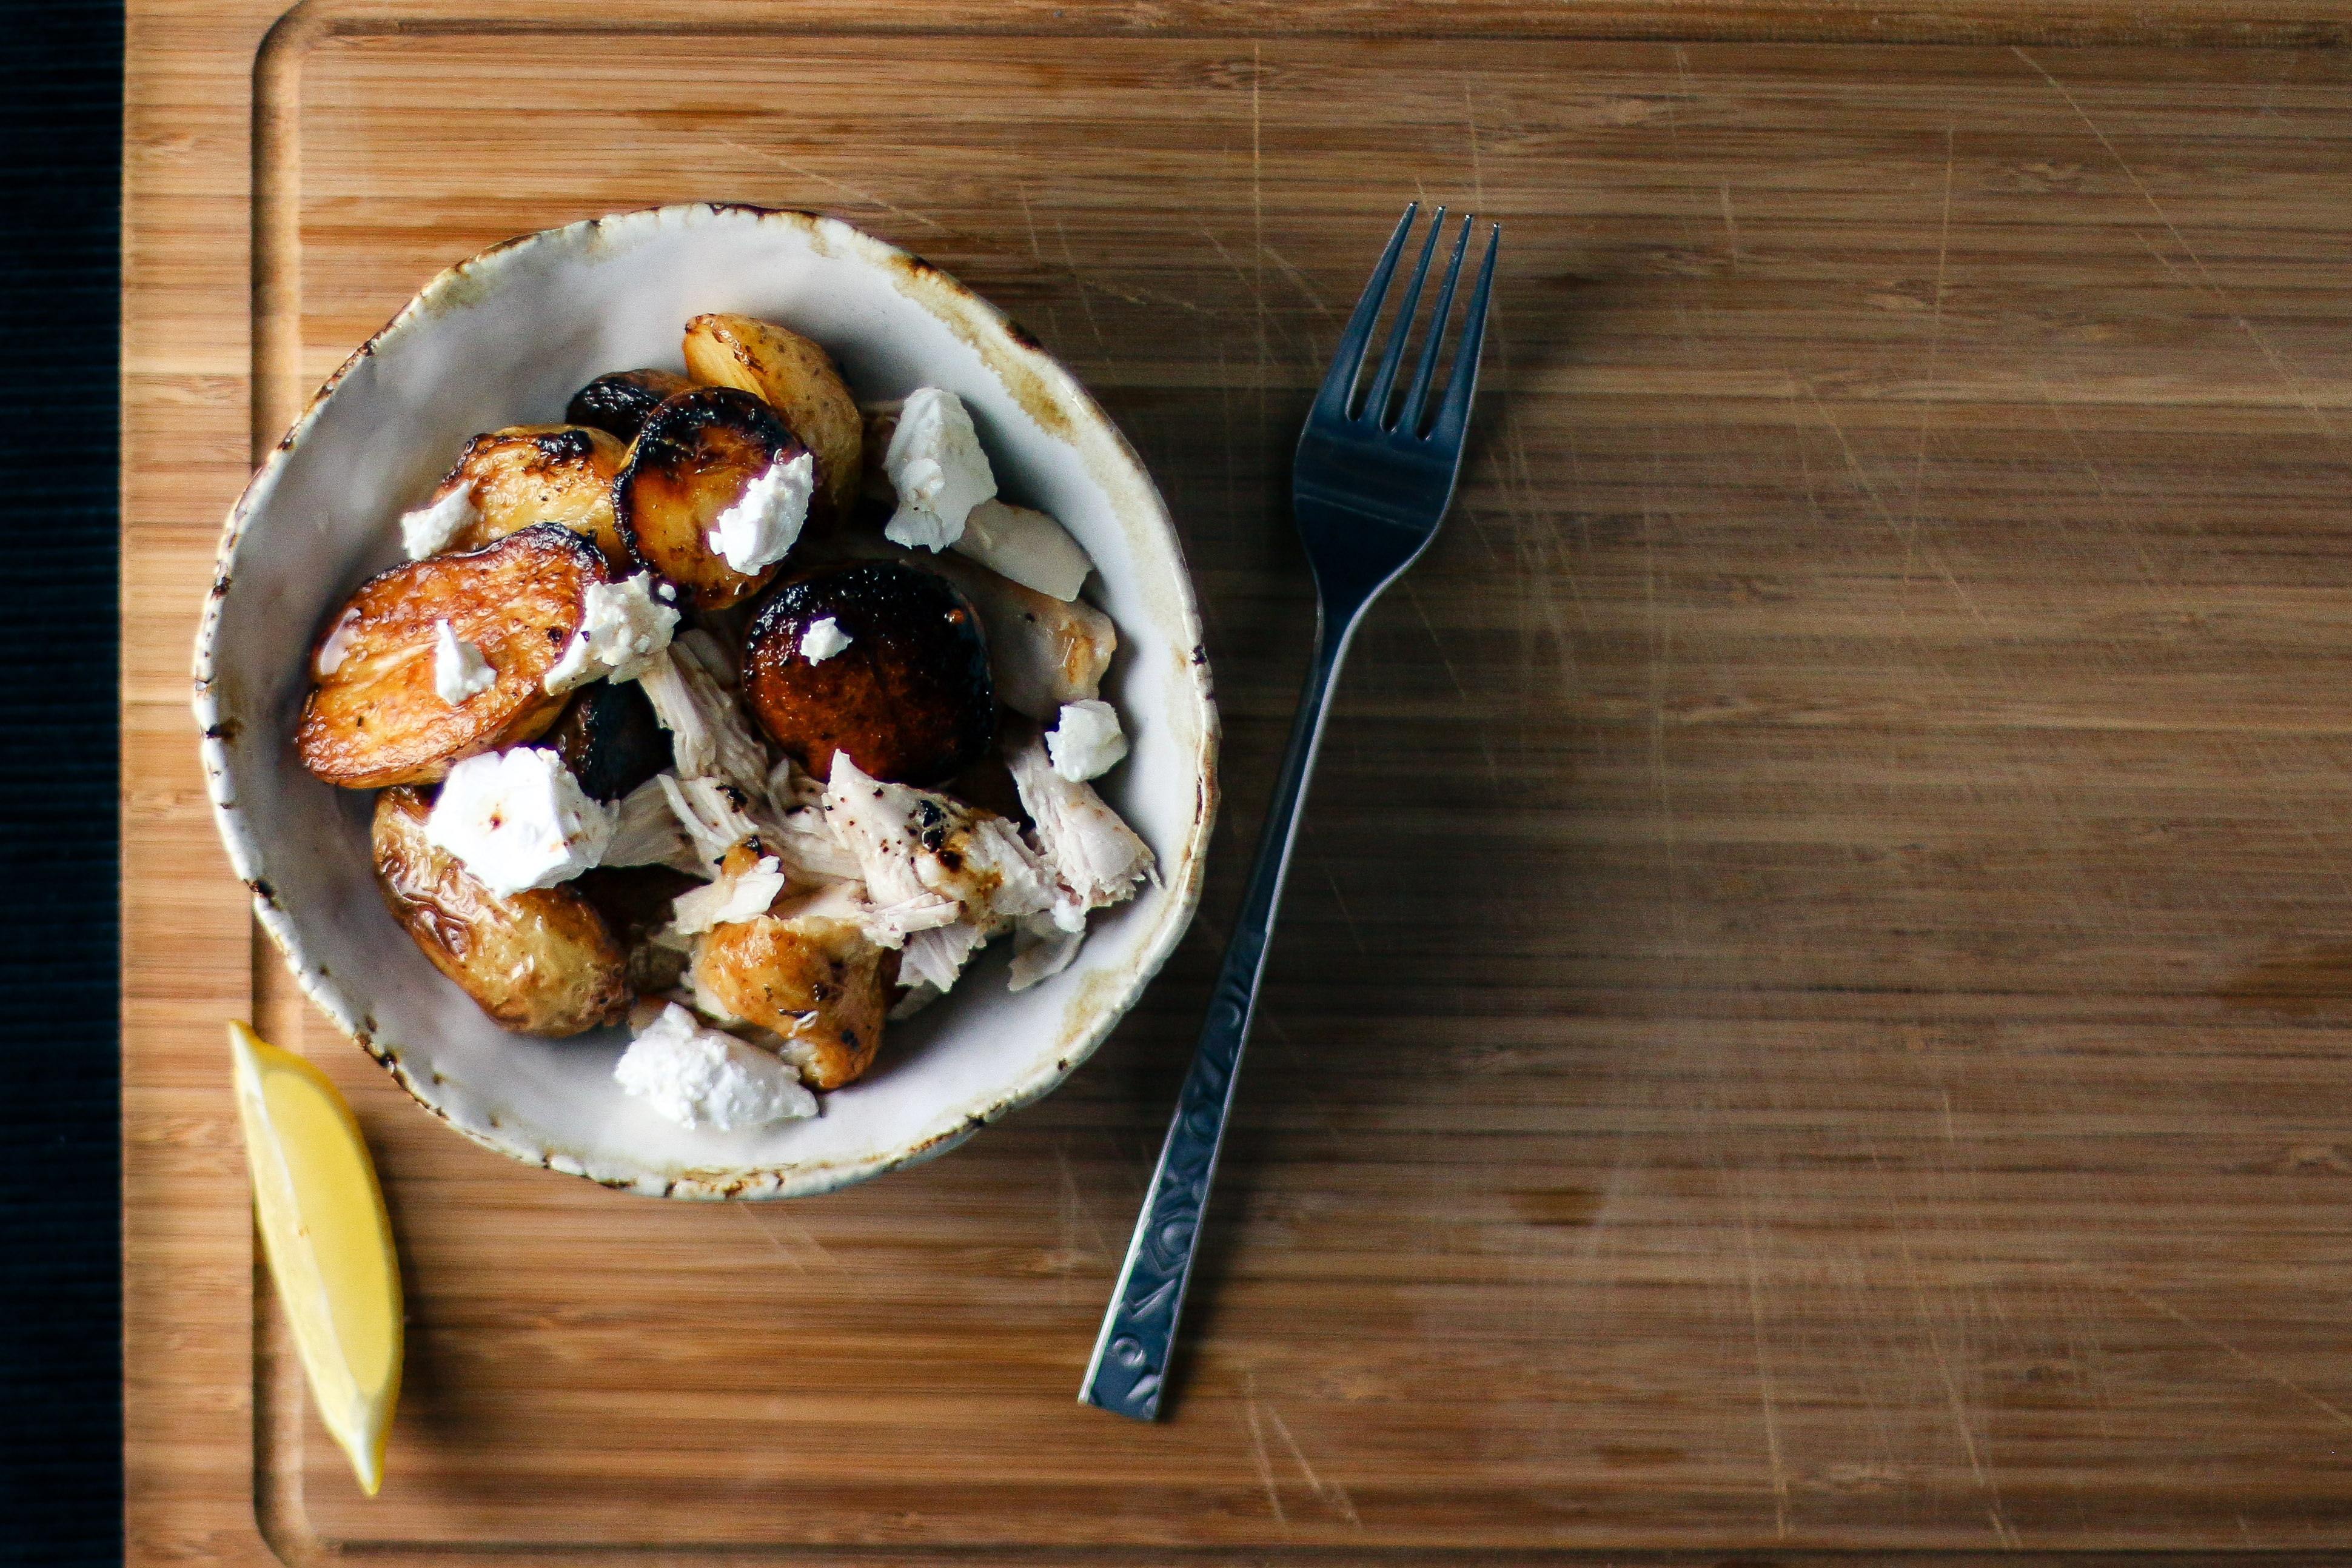 Greek Chicken & Potatoes with Feta Cheese | I Will Not Eat Oysters